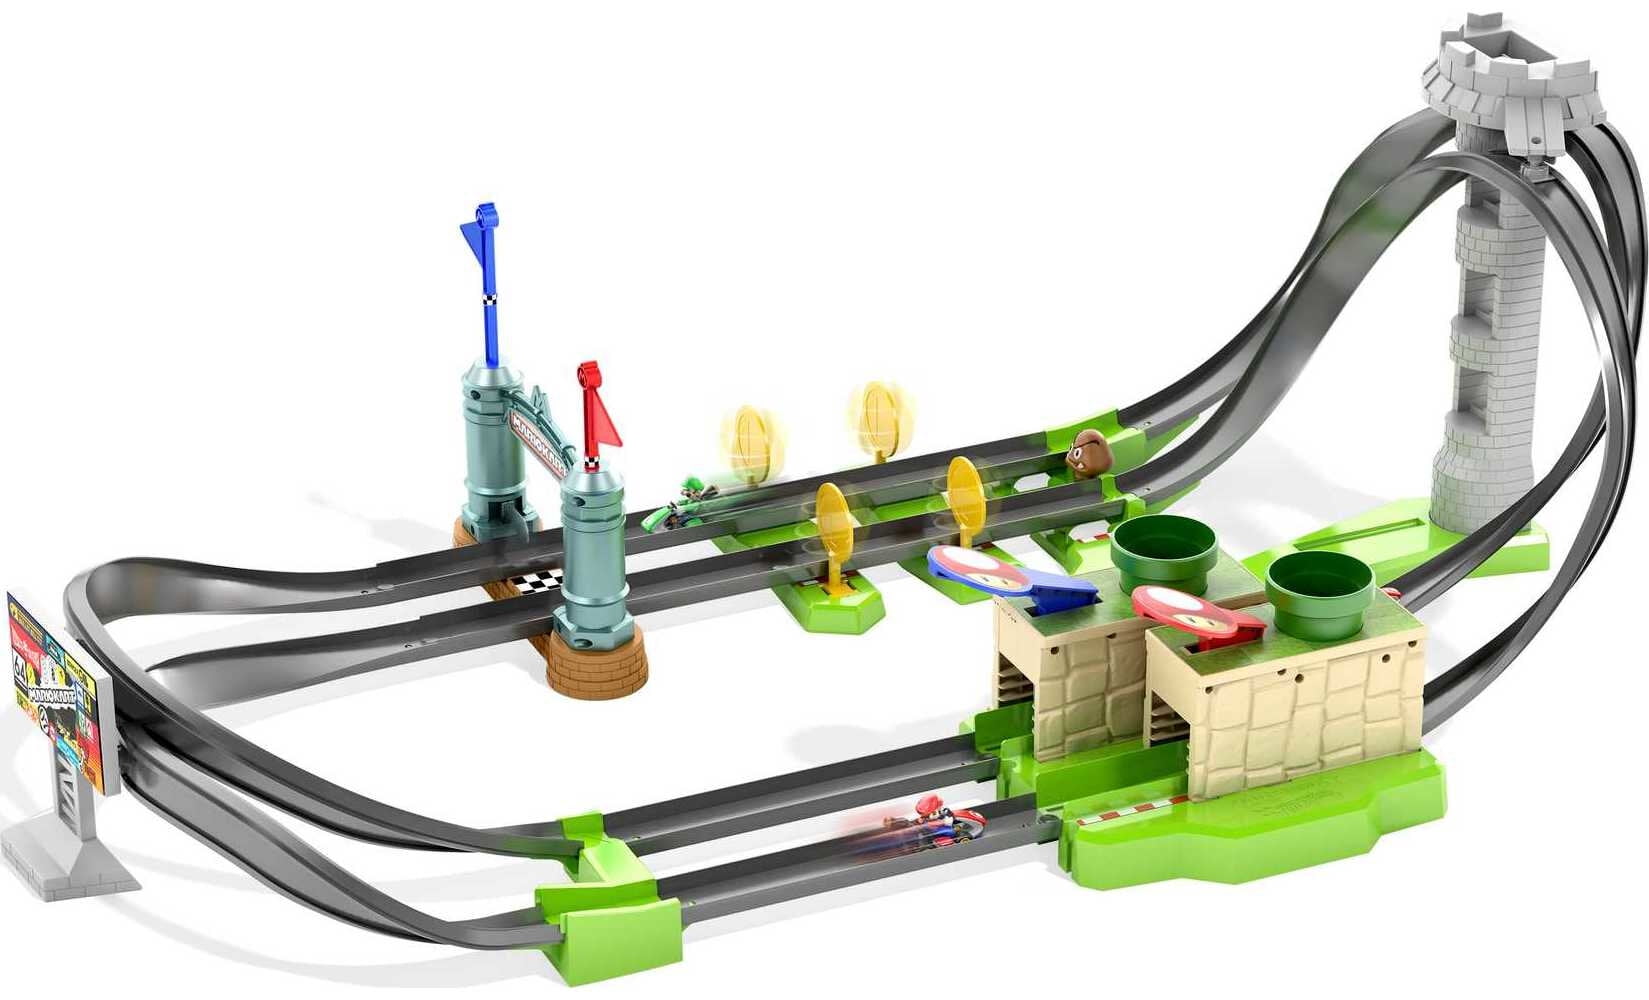 Buy Hot Wheels Mario Circuit Track Set Online at Low Prices in